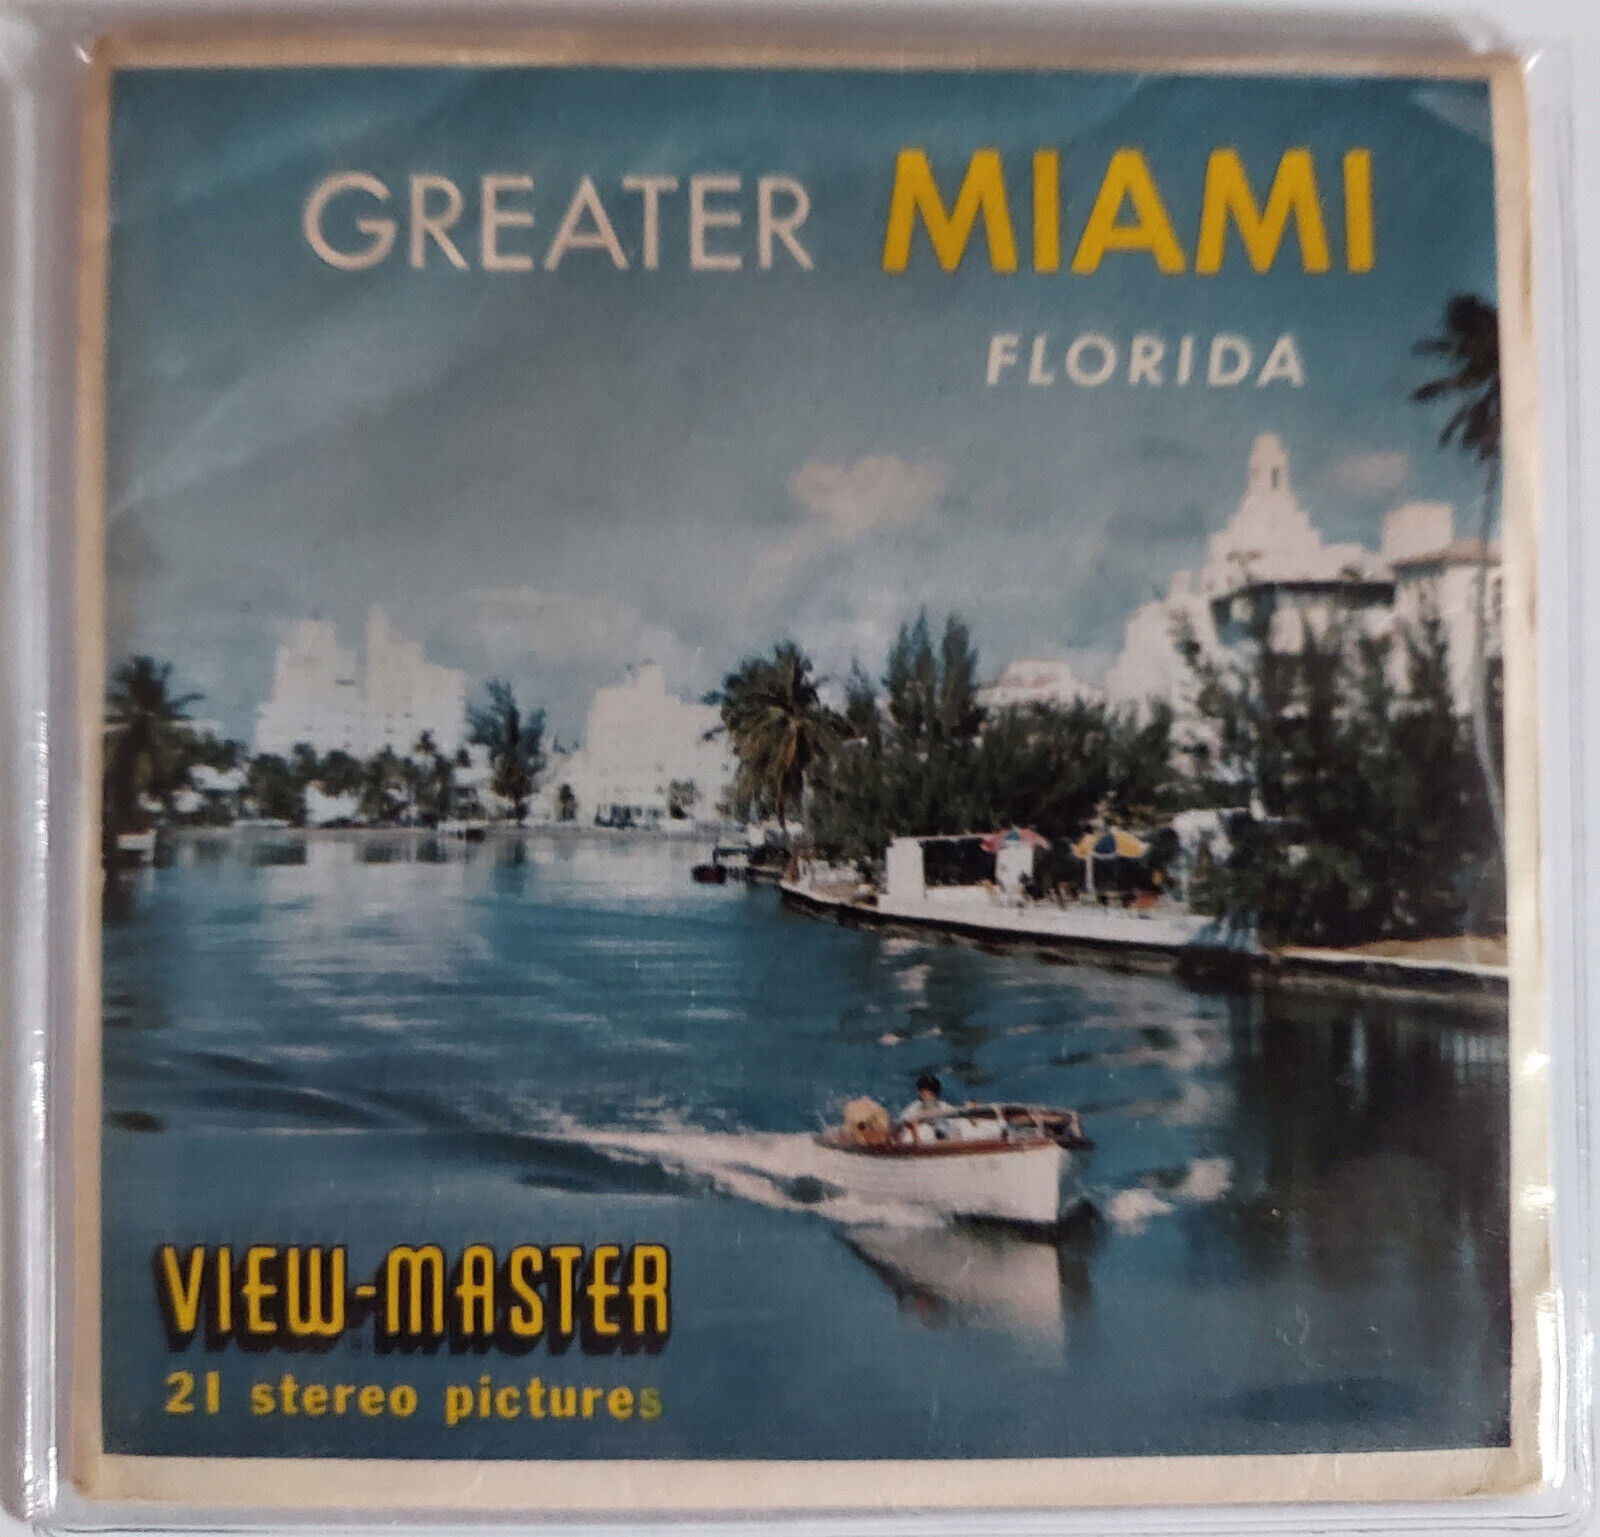 View-Master Greater Miami Florida 3 reel packet A963